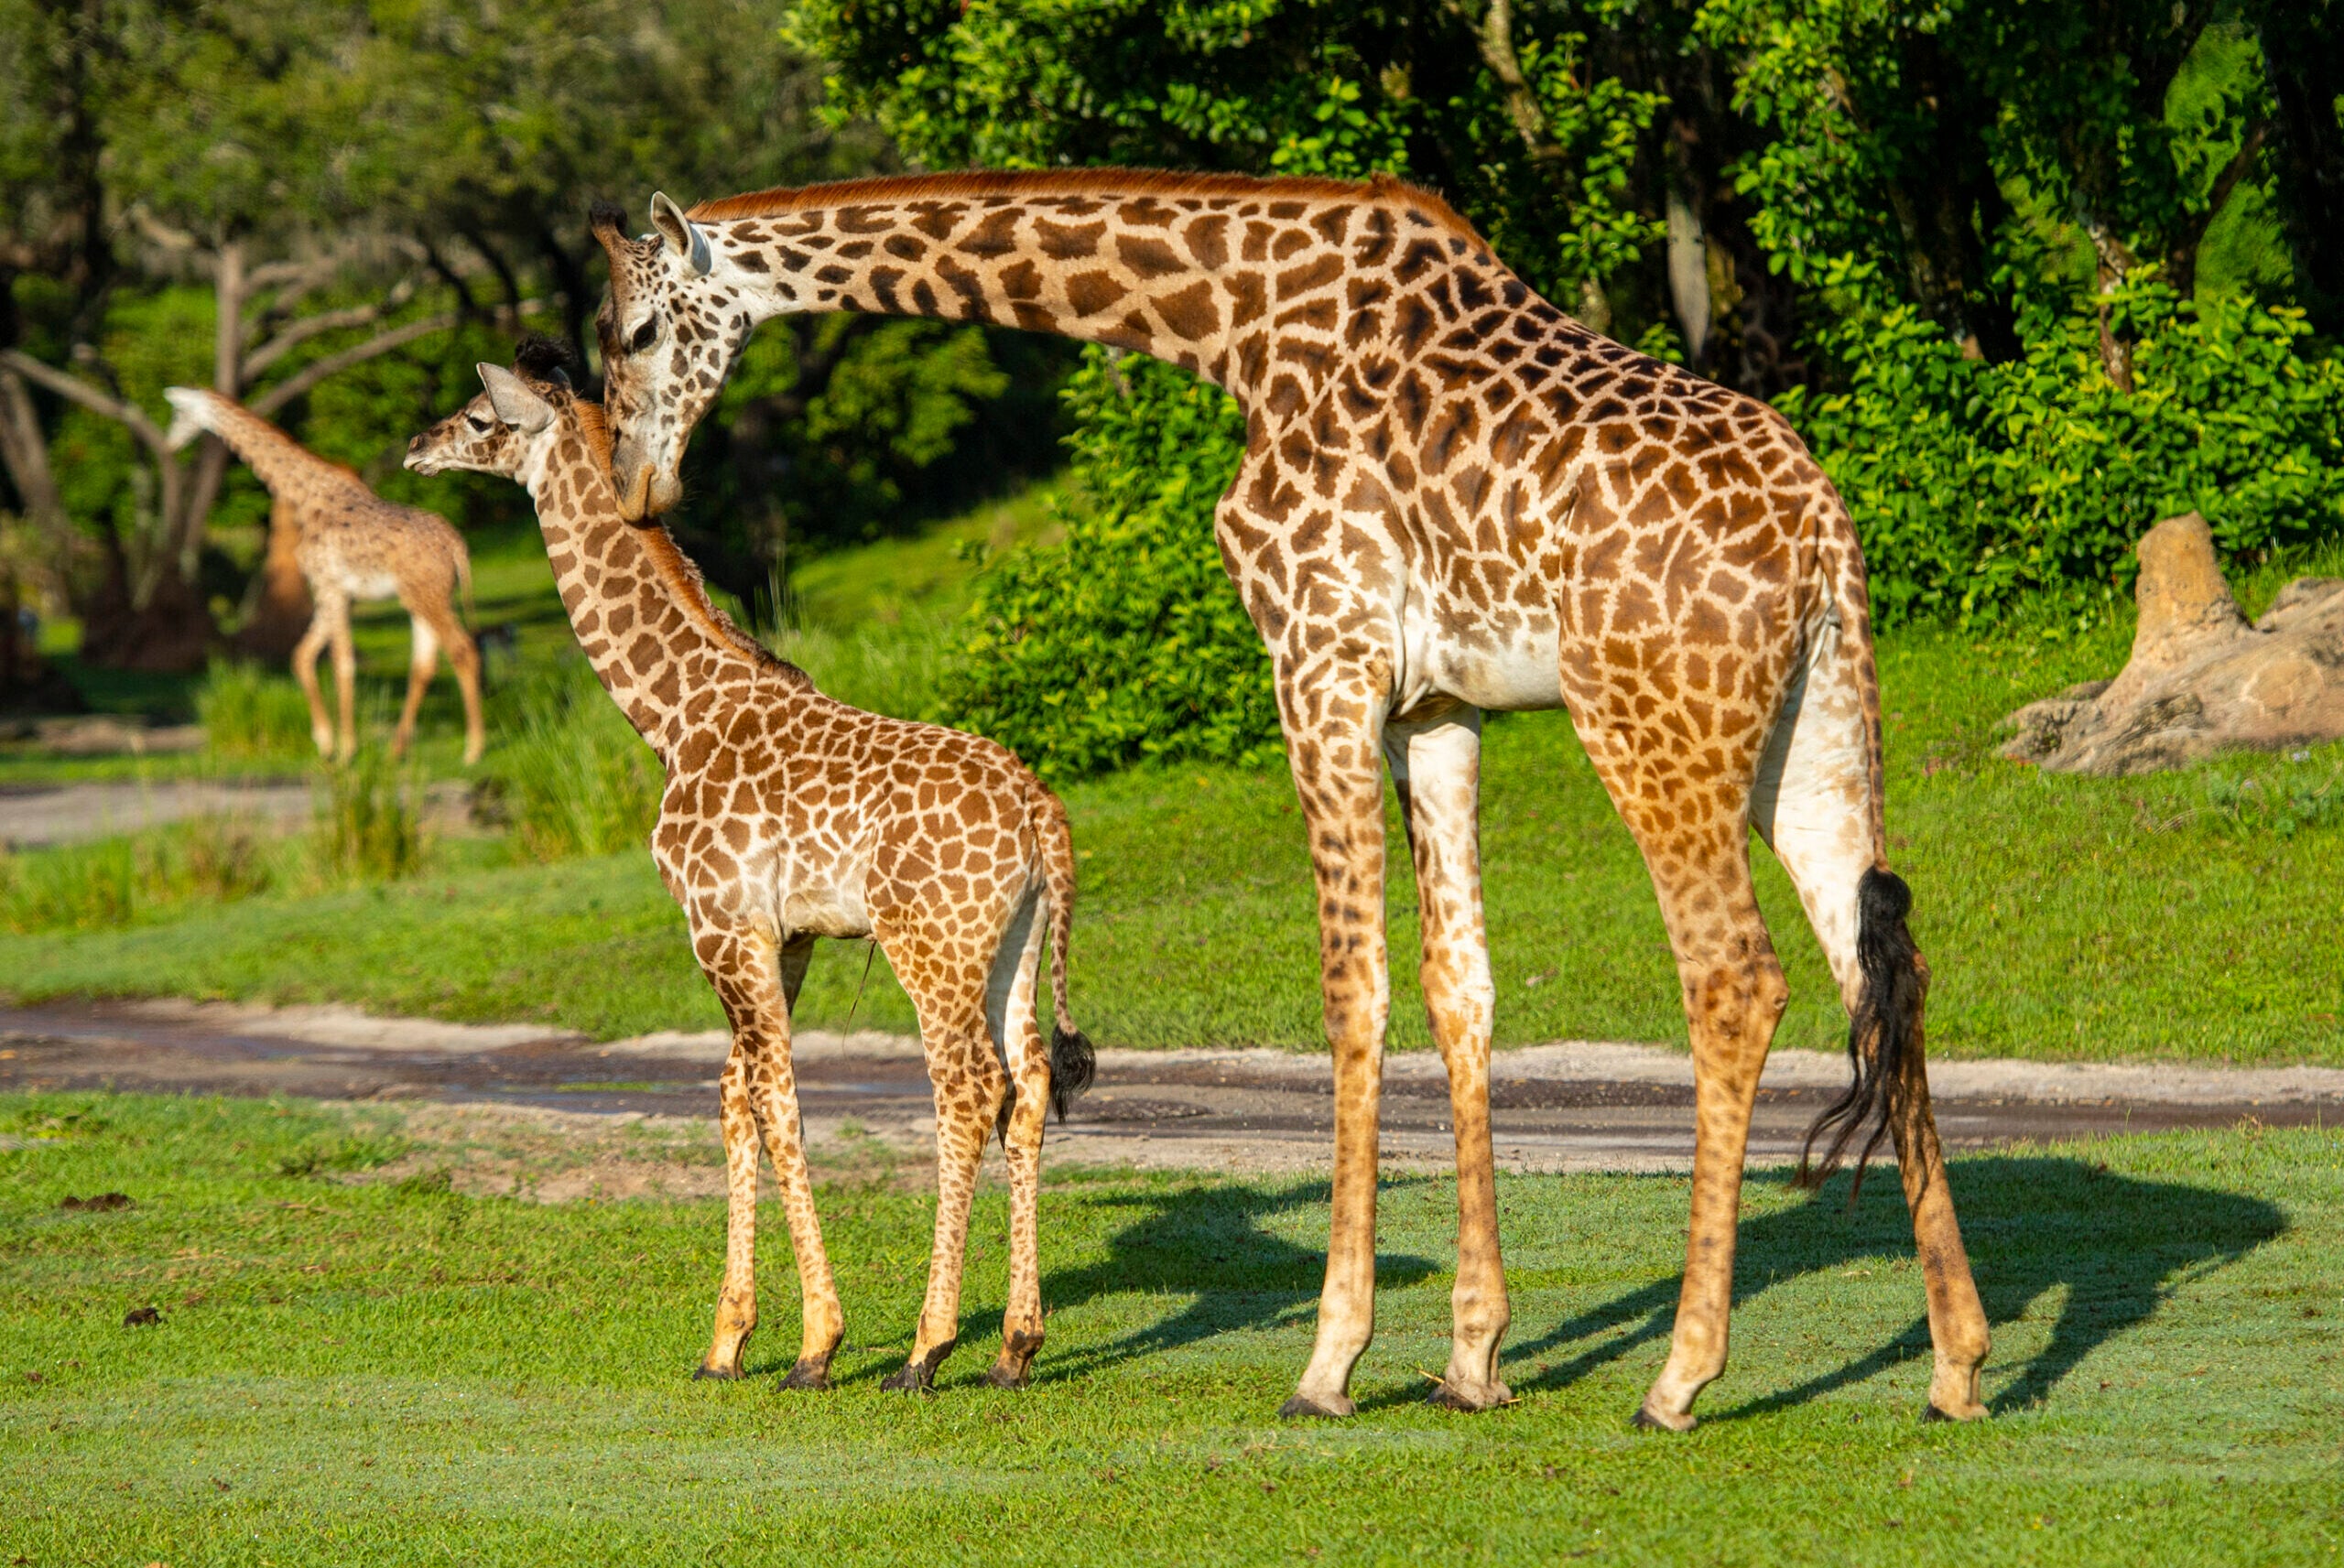 Humphrey the baby giraffe with his mother at Animal Kingdom